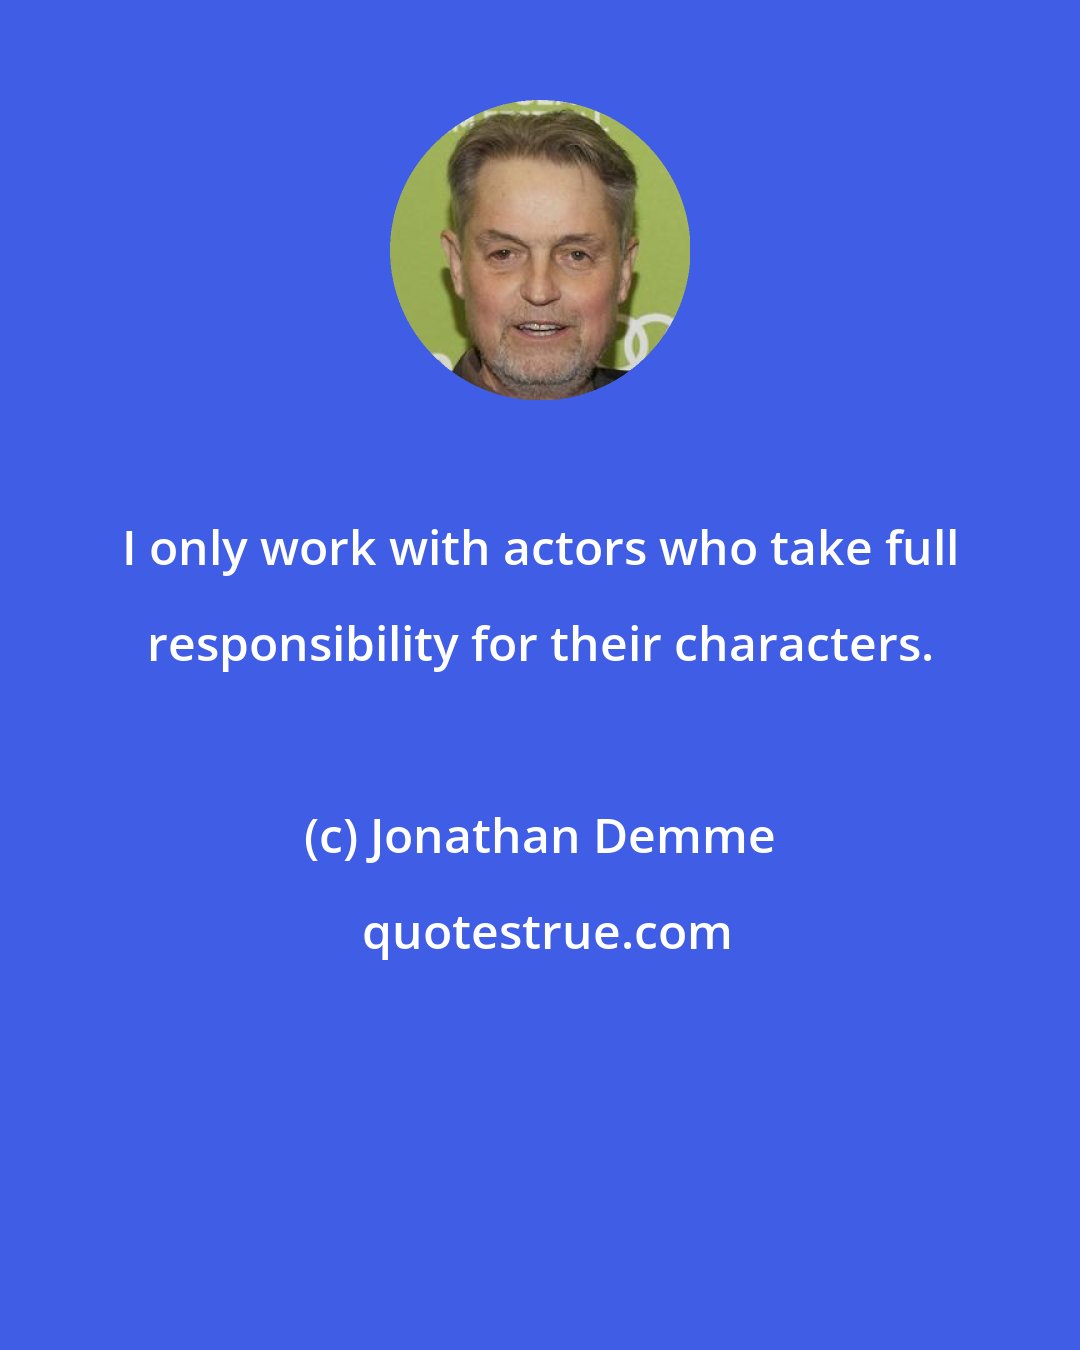 Jonathan Demme: I only work with actors who take full responsibility for their characters.